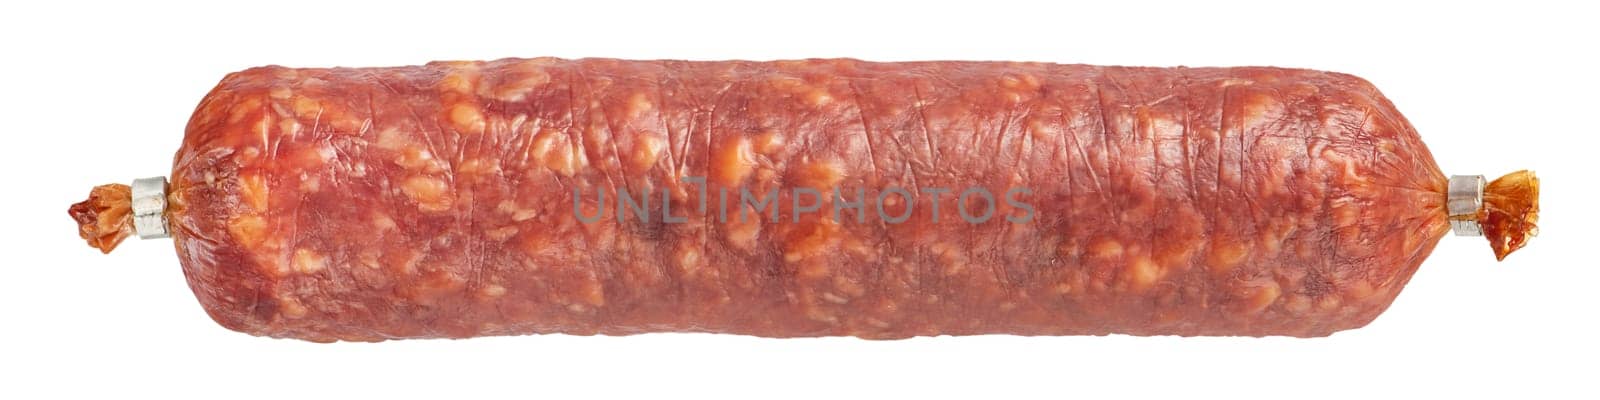 Dried sausage roll on a white isolated background. The sausage roll is suitable for inserting into a design or project. High quality photo